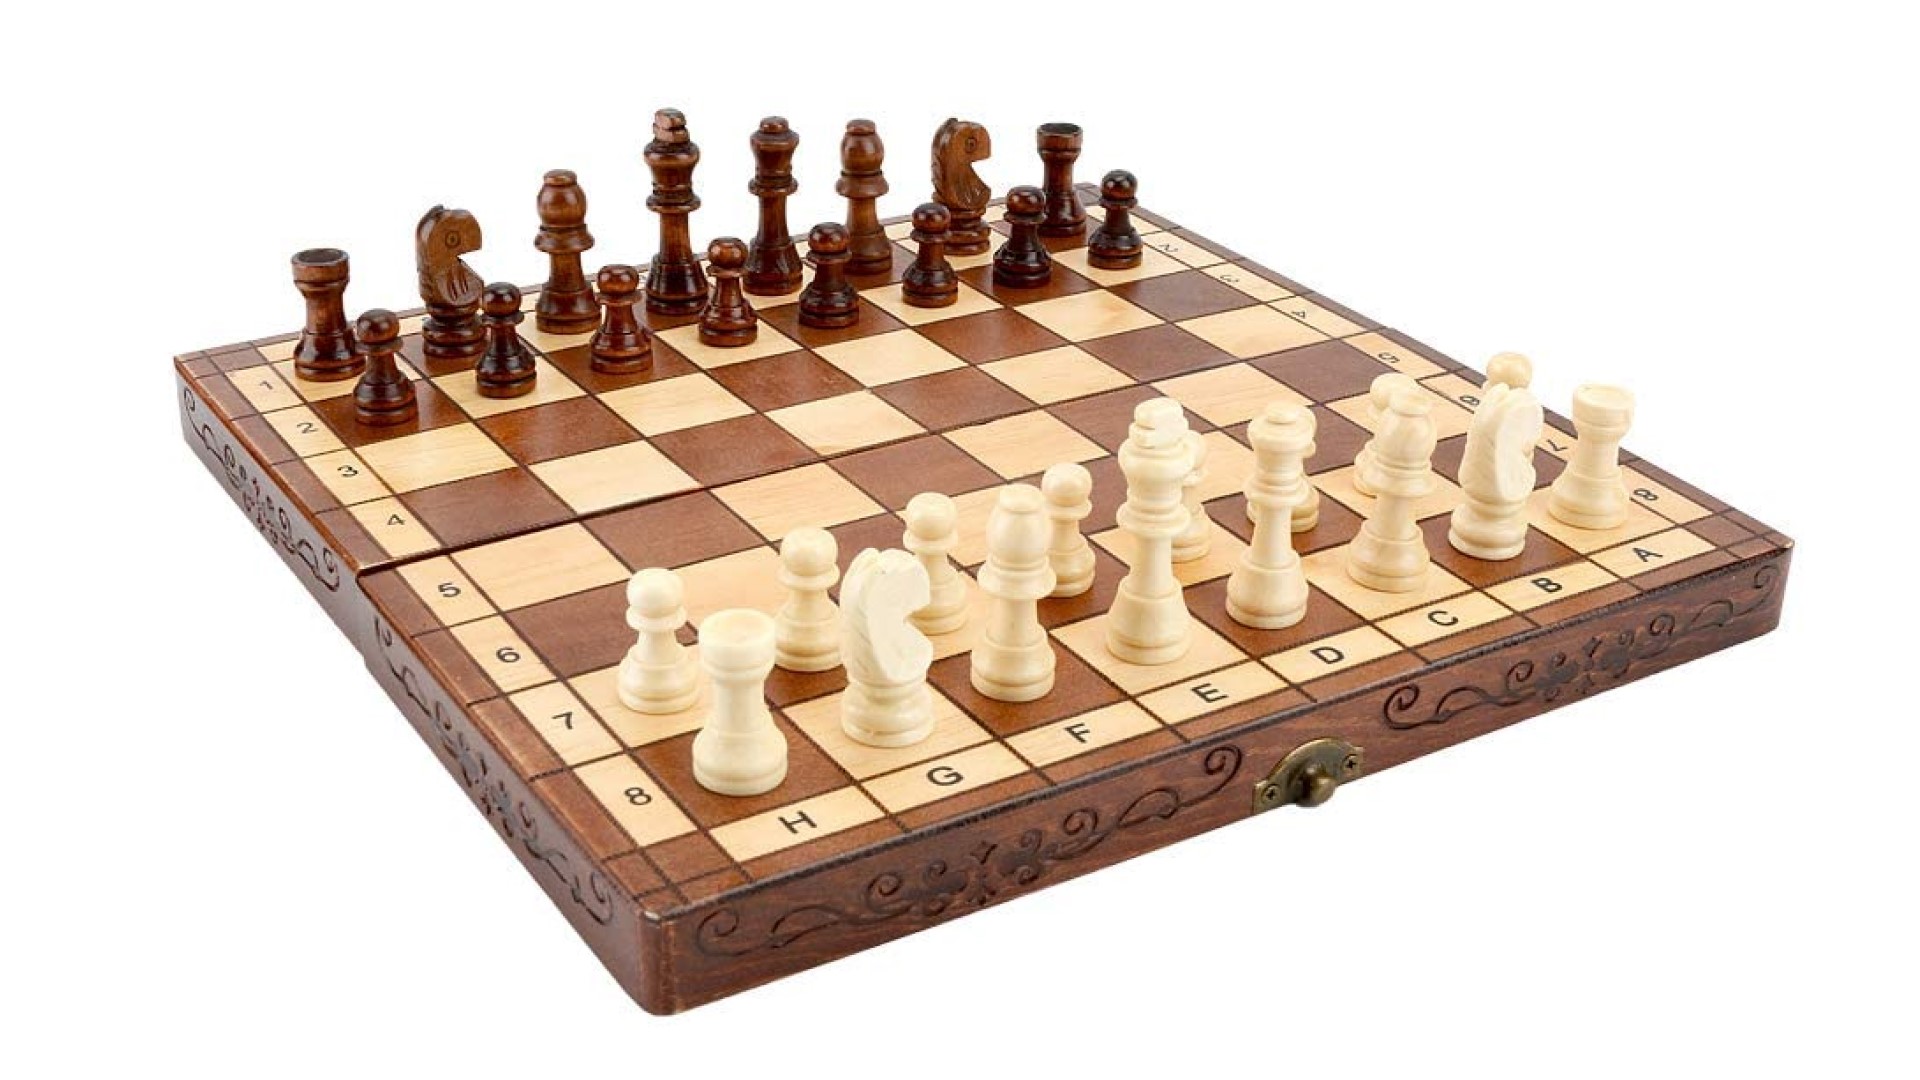 Best classic board games: Chess. Image shows a foldable chess board set up for a game.